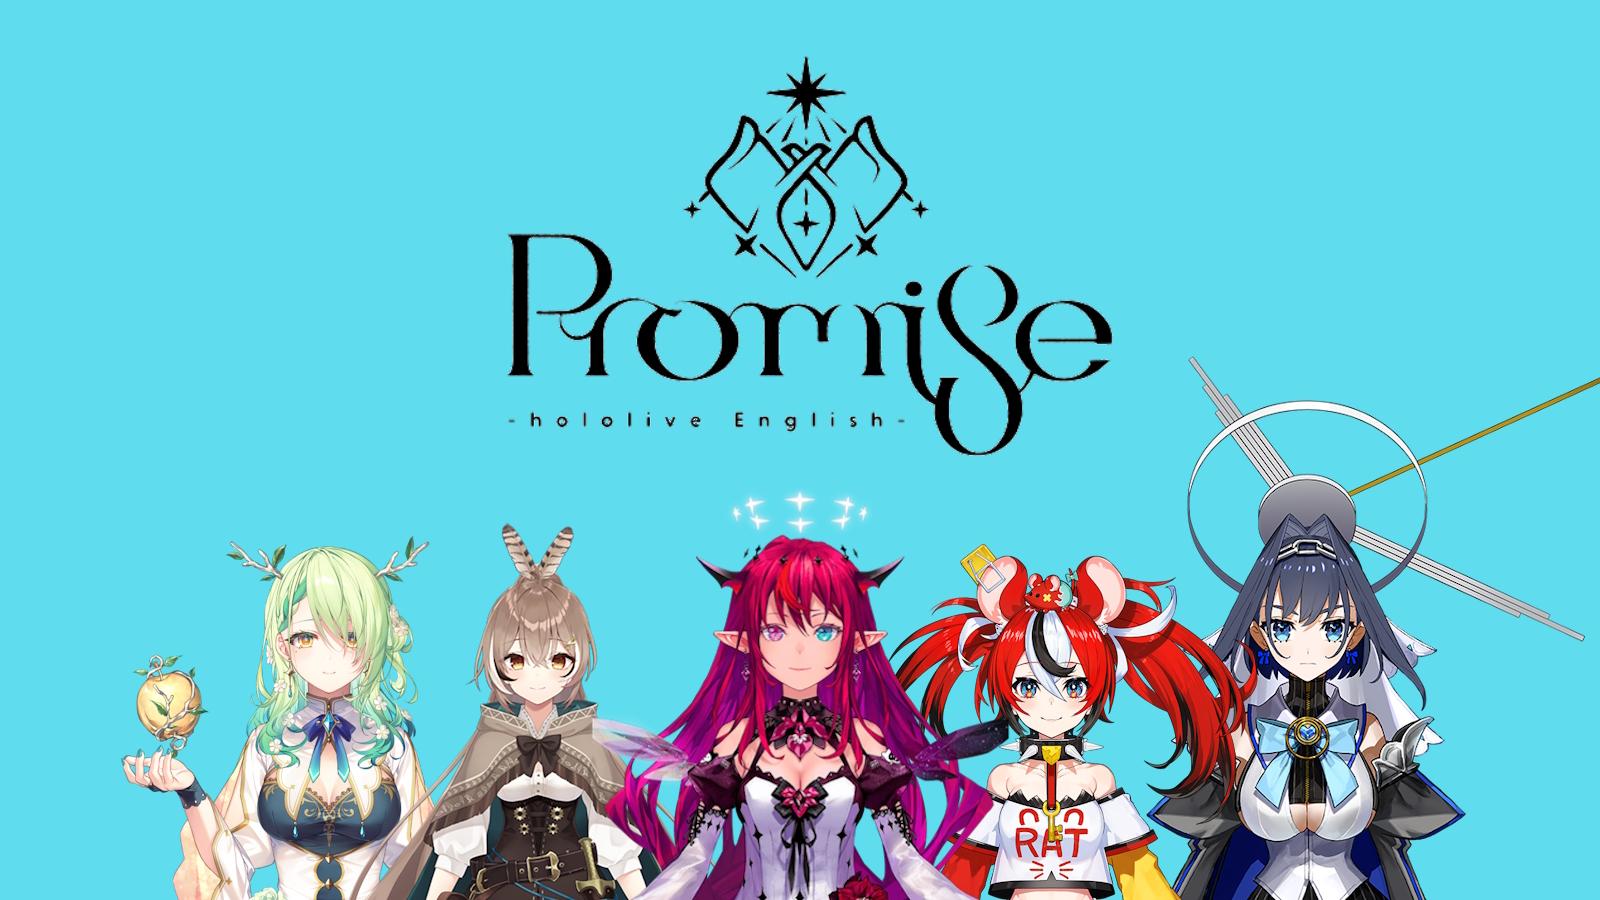 Hololive English Promise new VTuber unit created in October 2023.